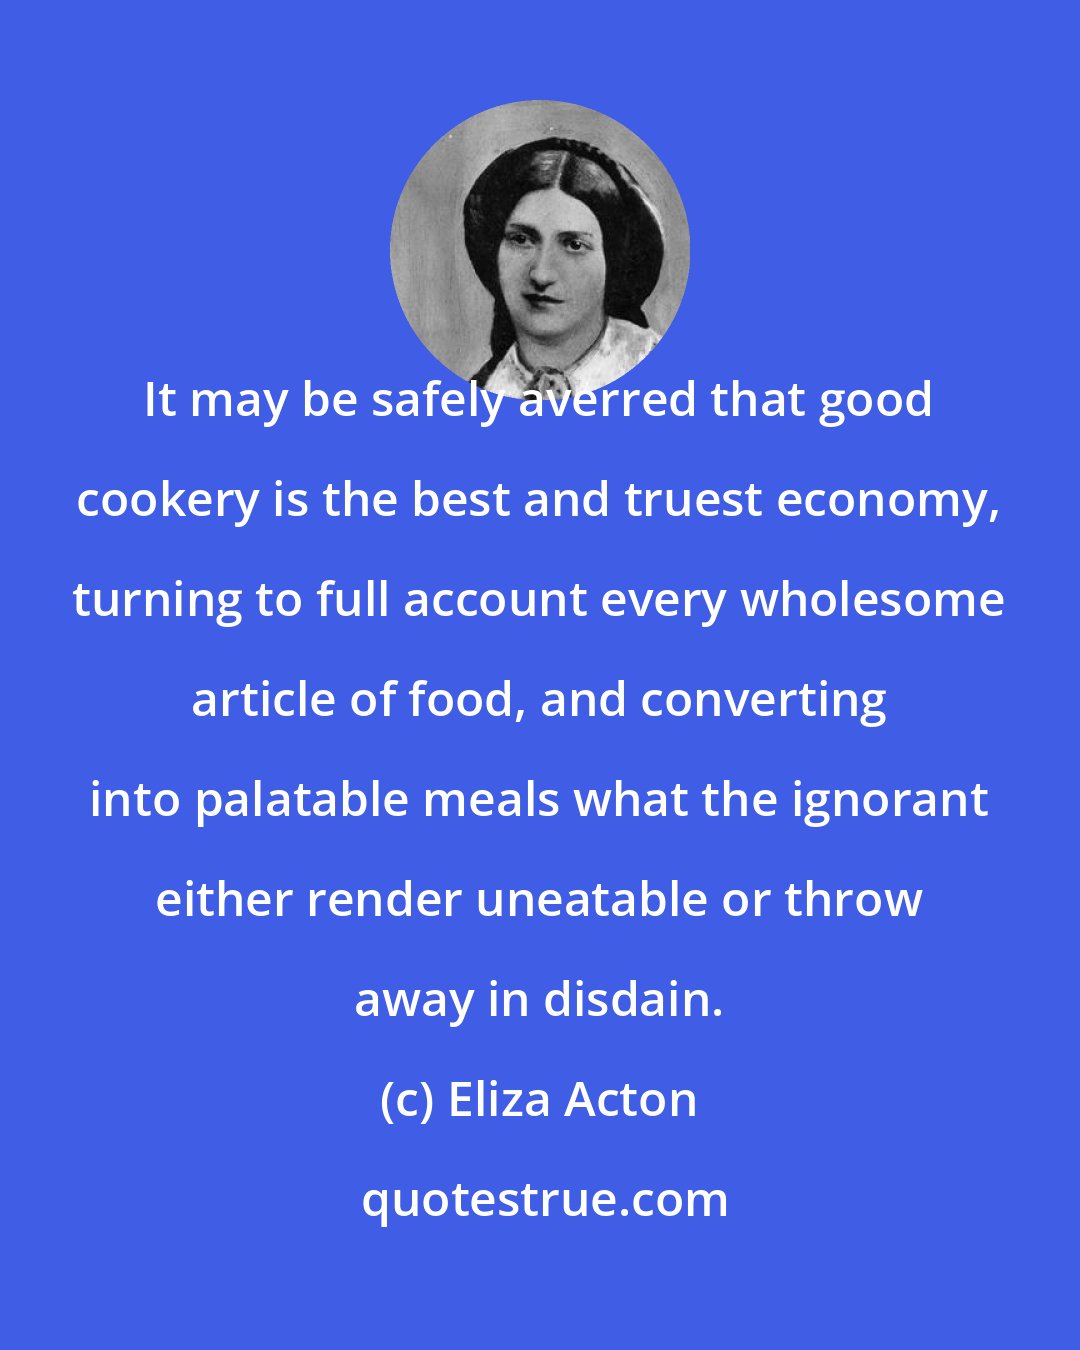 Eliza Acton: It may be safely averred that good cookery is the best and truest economy, turning to full account every wholesome article of food, and converting into palatable meals what the ignorant either render uneatable or throw away in disdain.